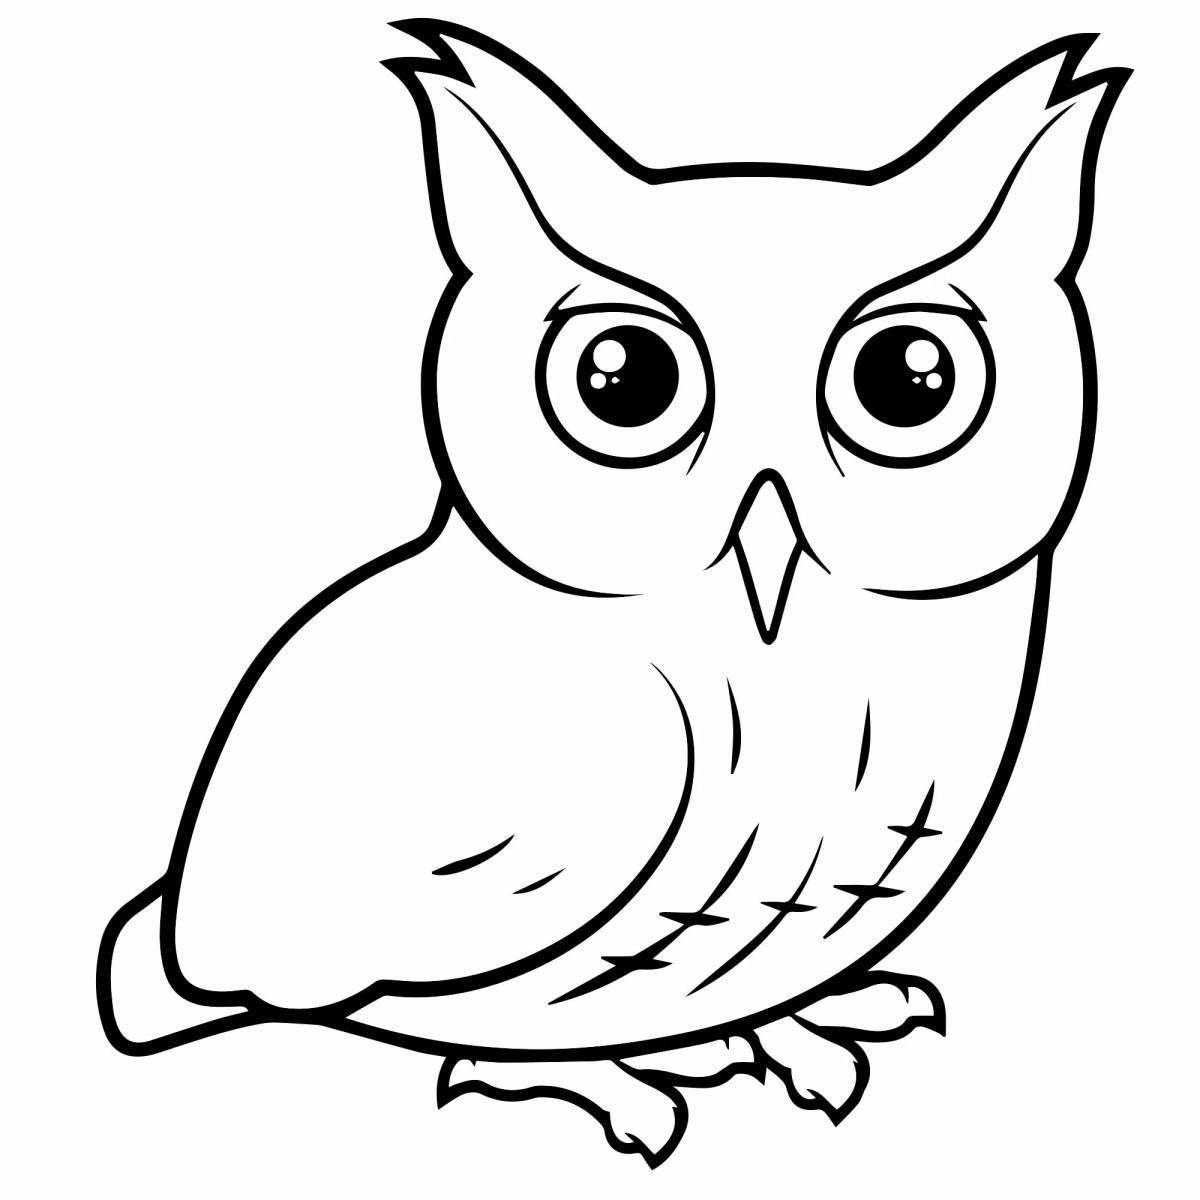 Beautiful coloring drawing of an owl